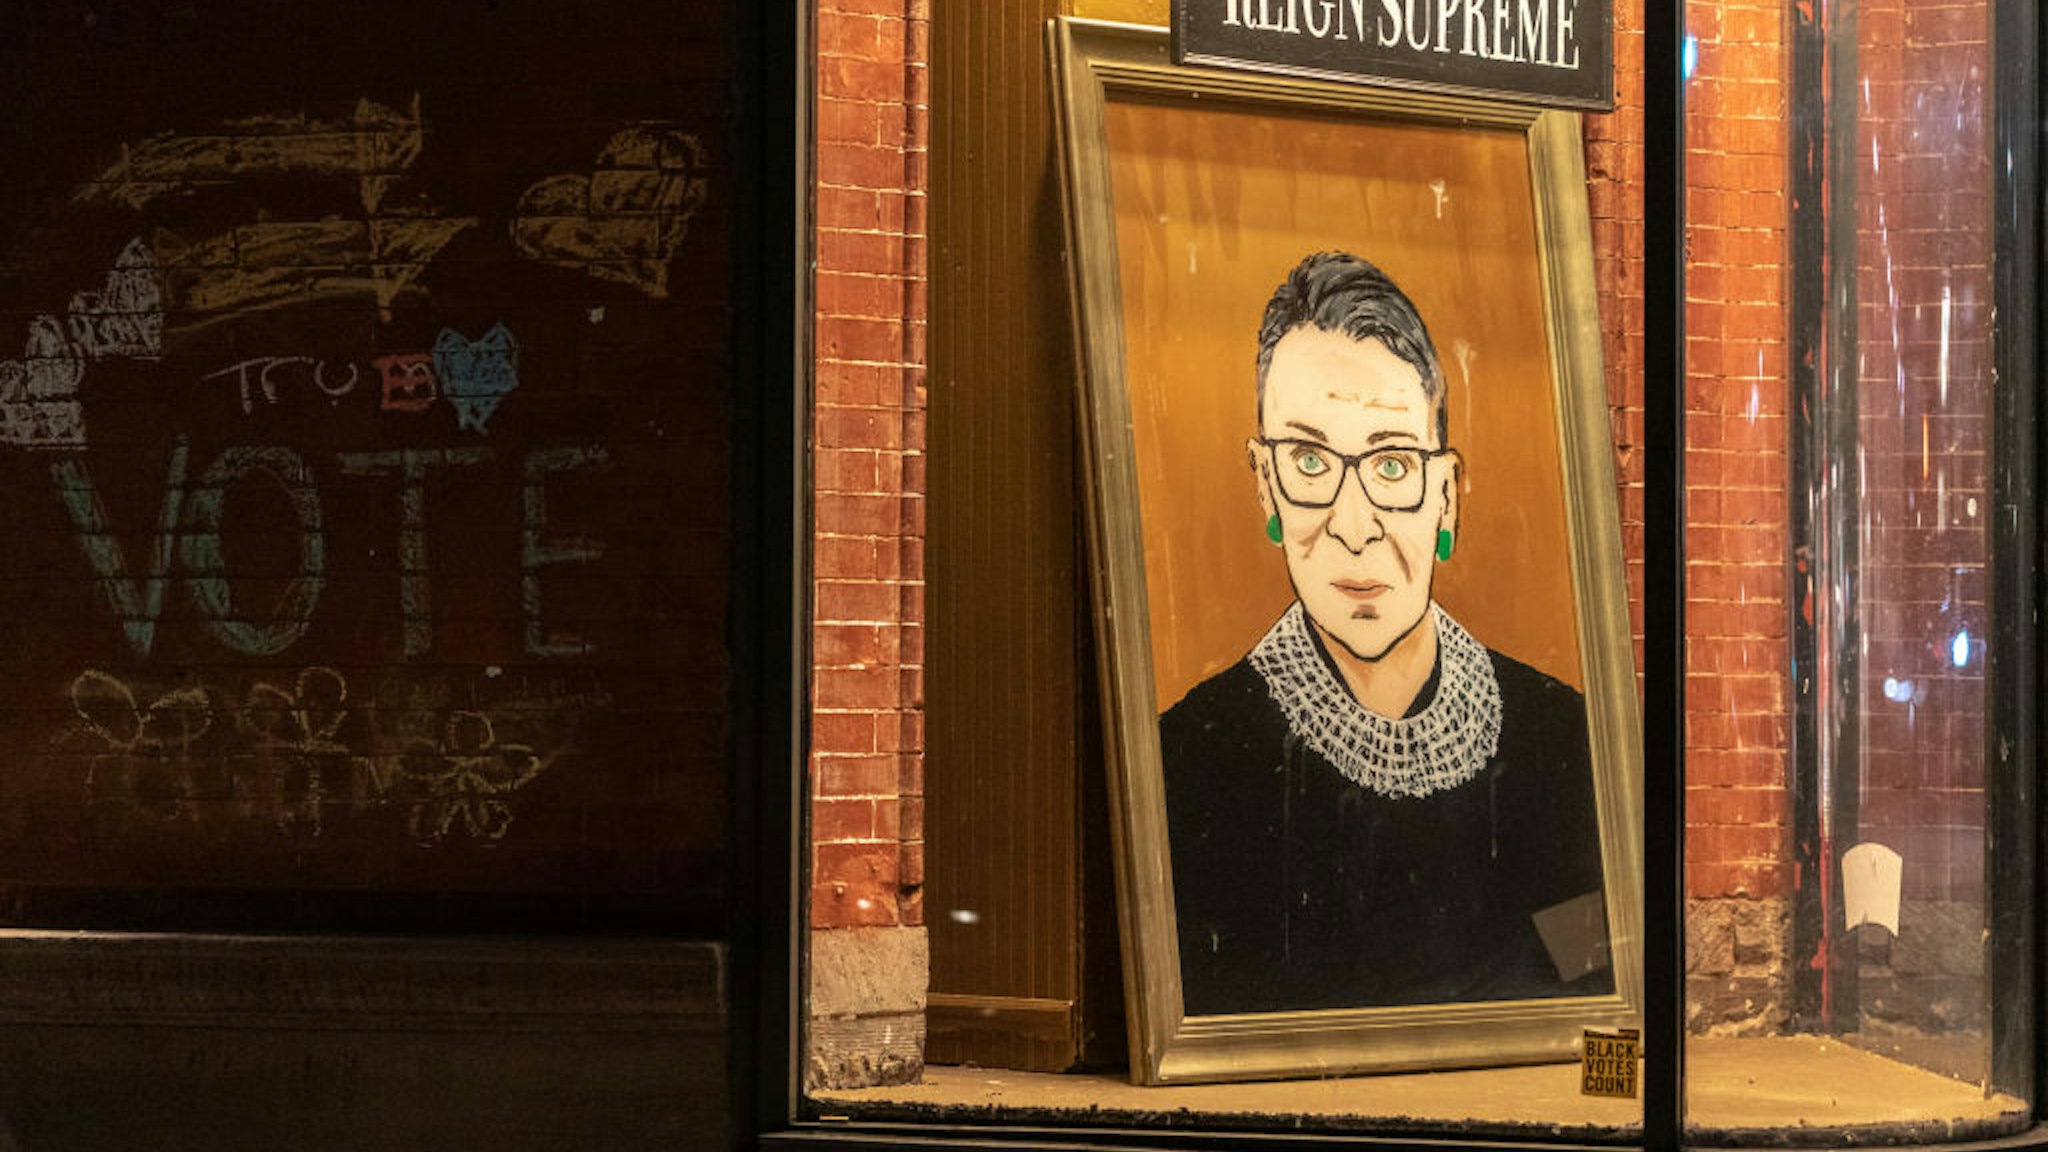 NEW YORK, NY - SEPTEMBER 19: A portrait of Supreme Court Justice Ruth Bader Ginsburg is displayed at a storefront on September 19, 2020 in New York, New York. Ginsburg has died at age 87 after a battle with pancreatic cancer. (Photo by Jeenah Moon/Getty Images)